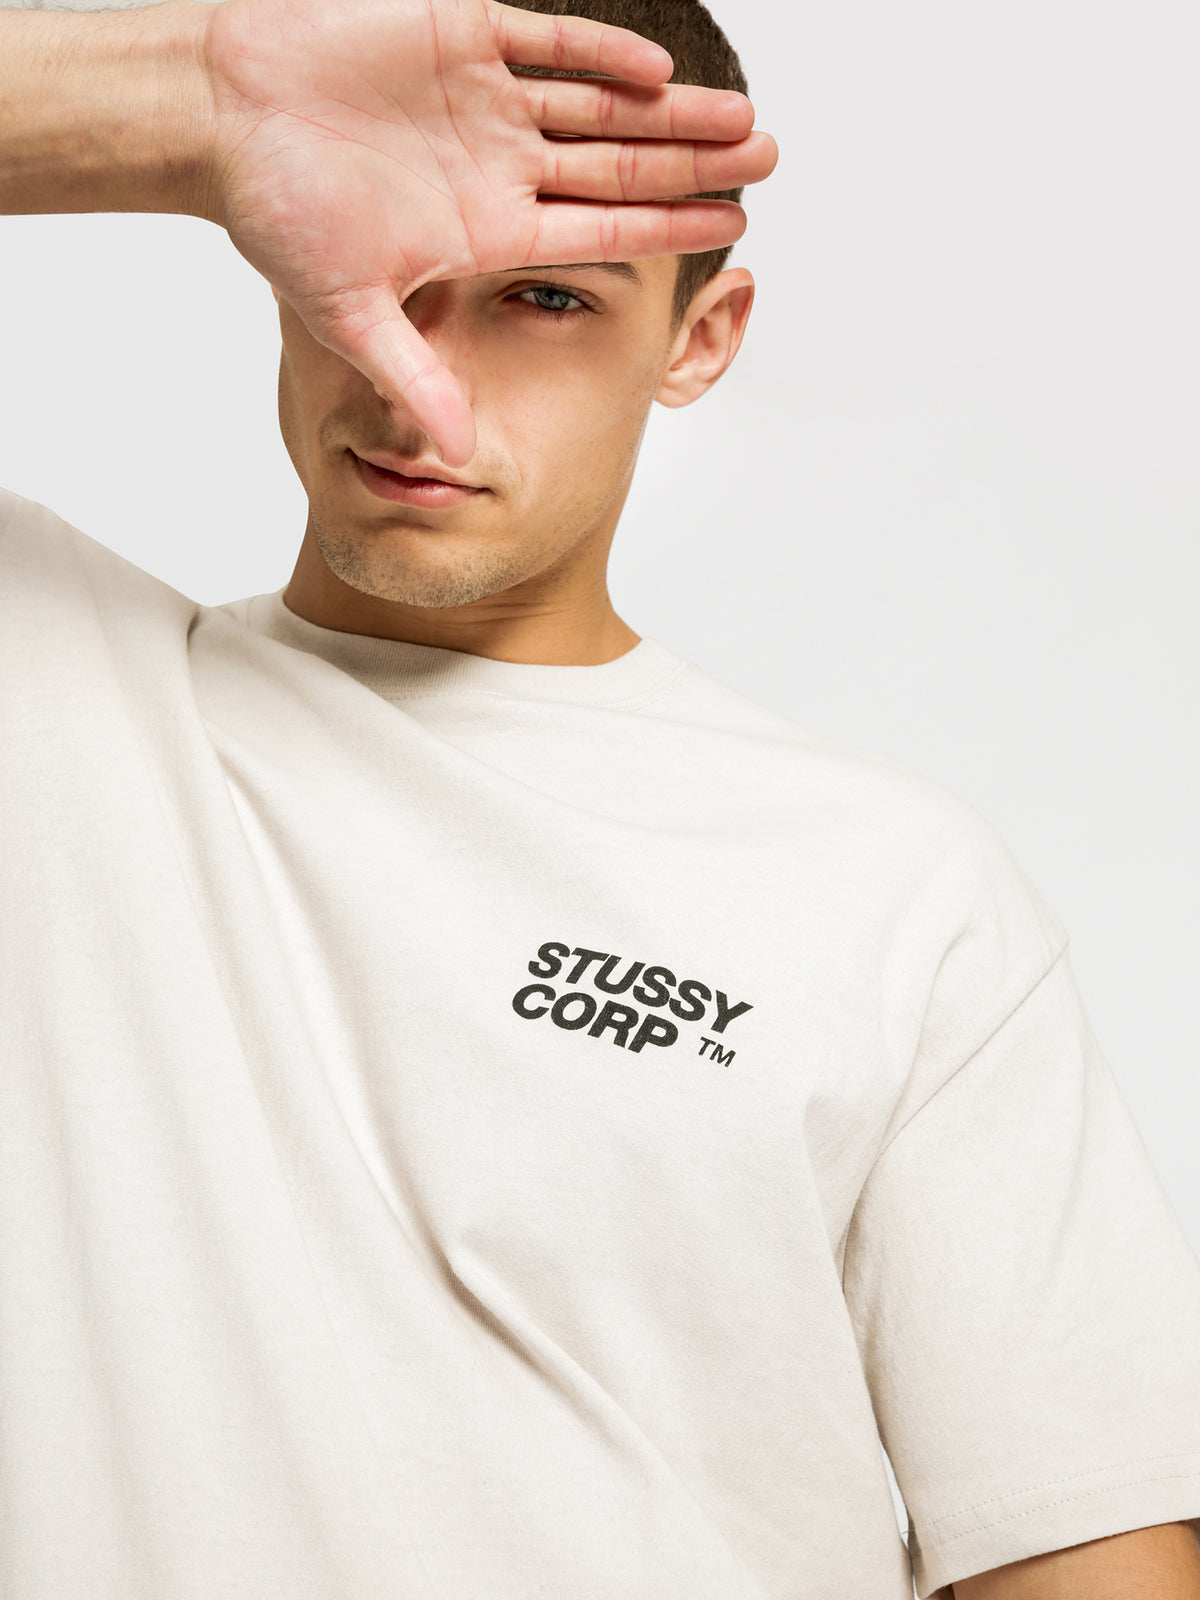 Corp Short Sleeve T-Shirt in White Sand